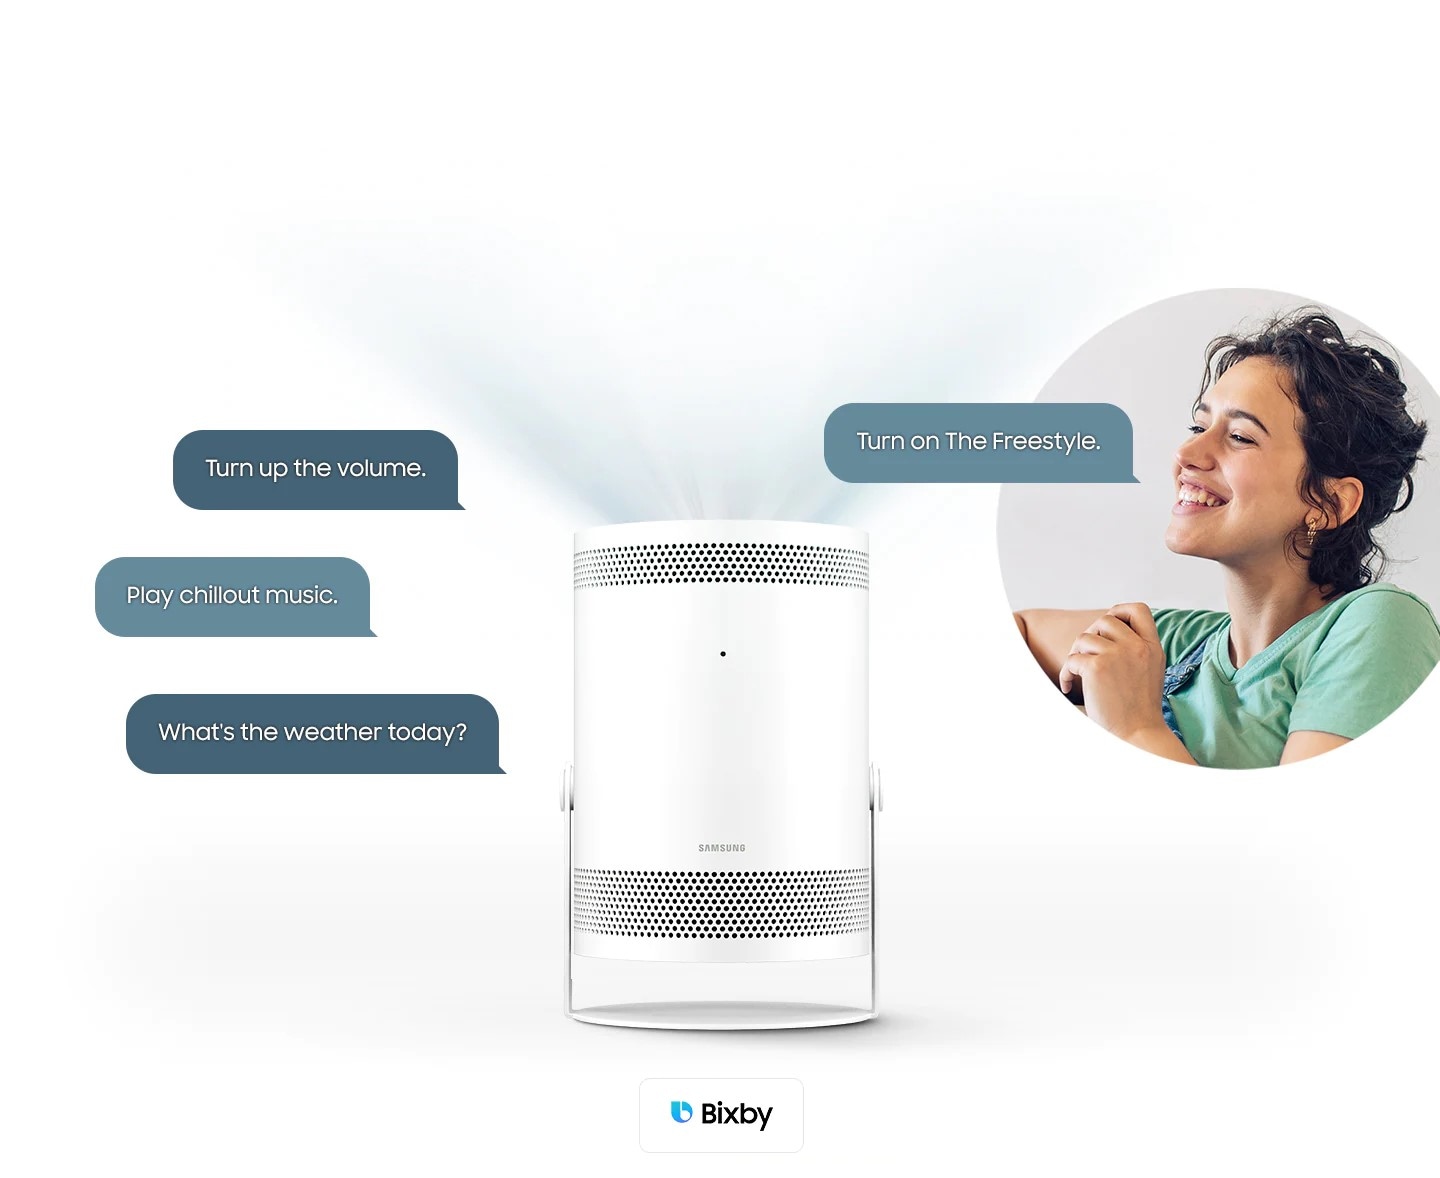 A woman is talking to The Freestyle saying "Turn on The Freestyle", "Turn up the volume", "Play chillout music", and "What's the weather today?" The †Bixby' and †Alexa built-in' logos are displayed on the bottom.